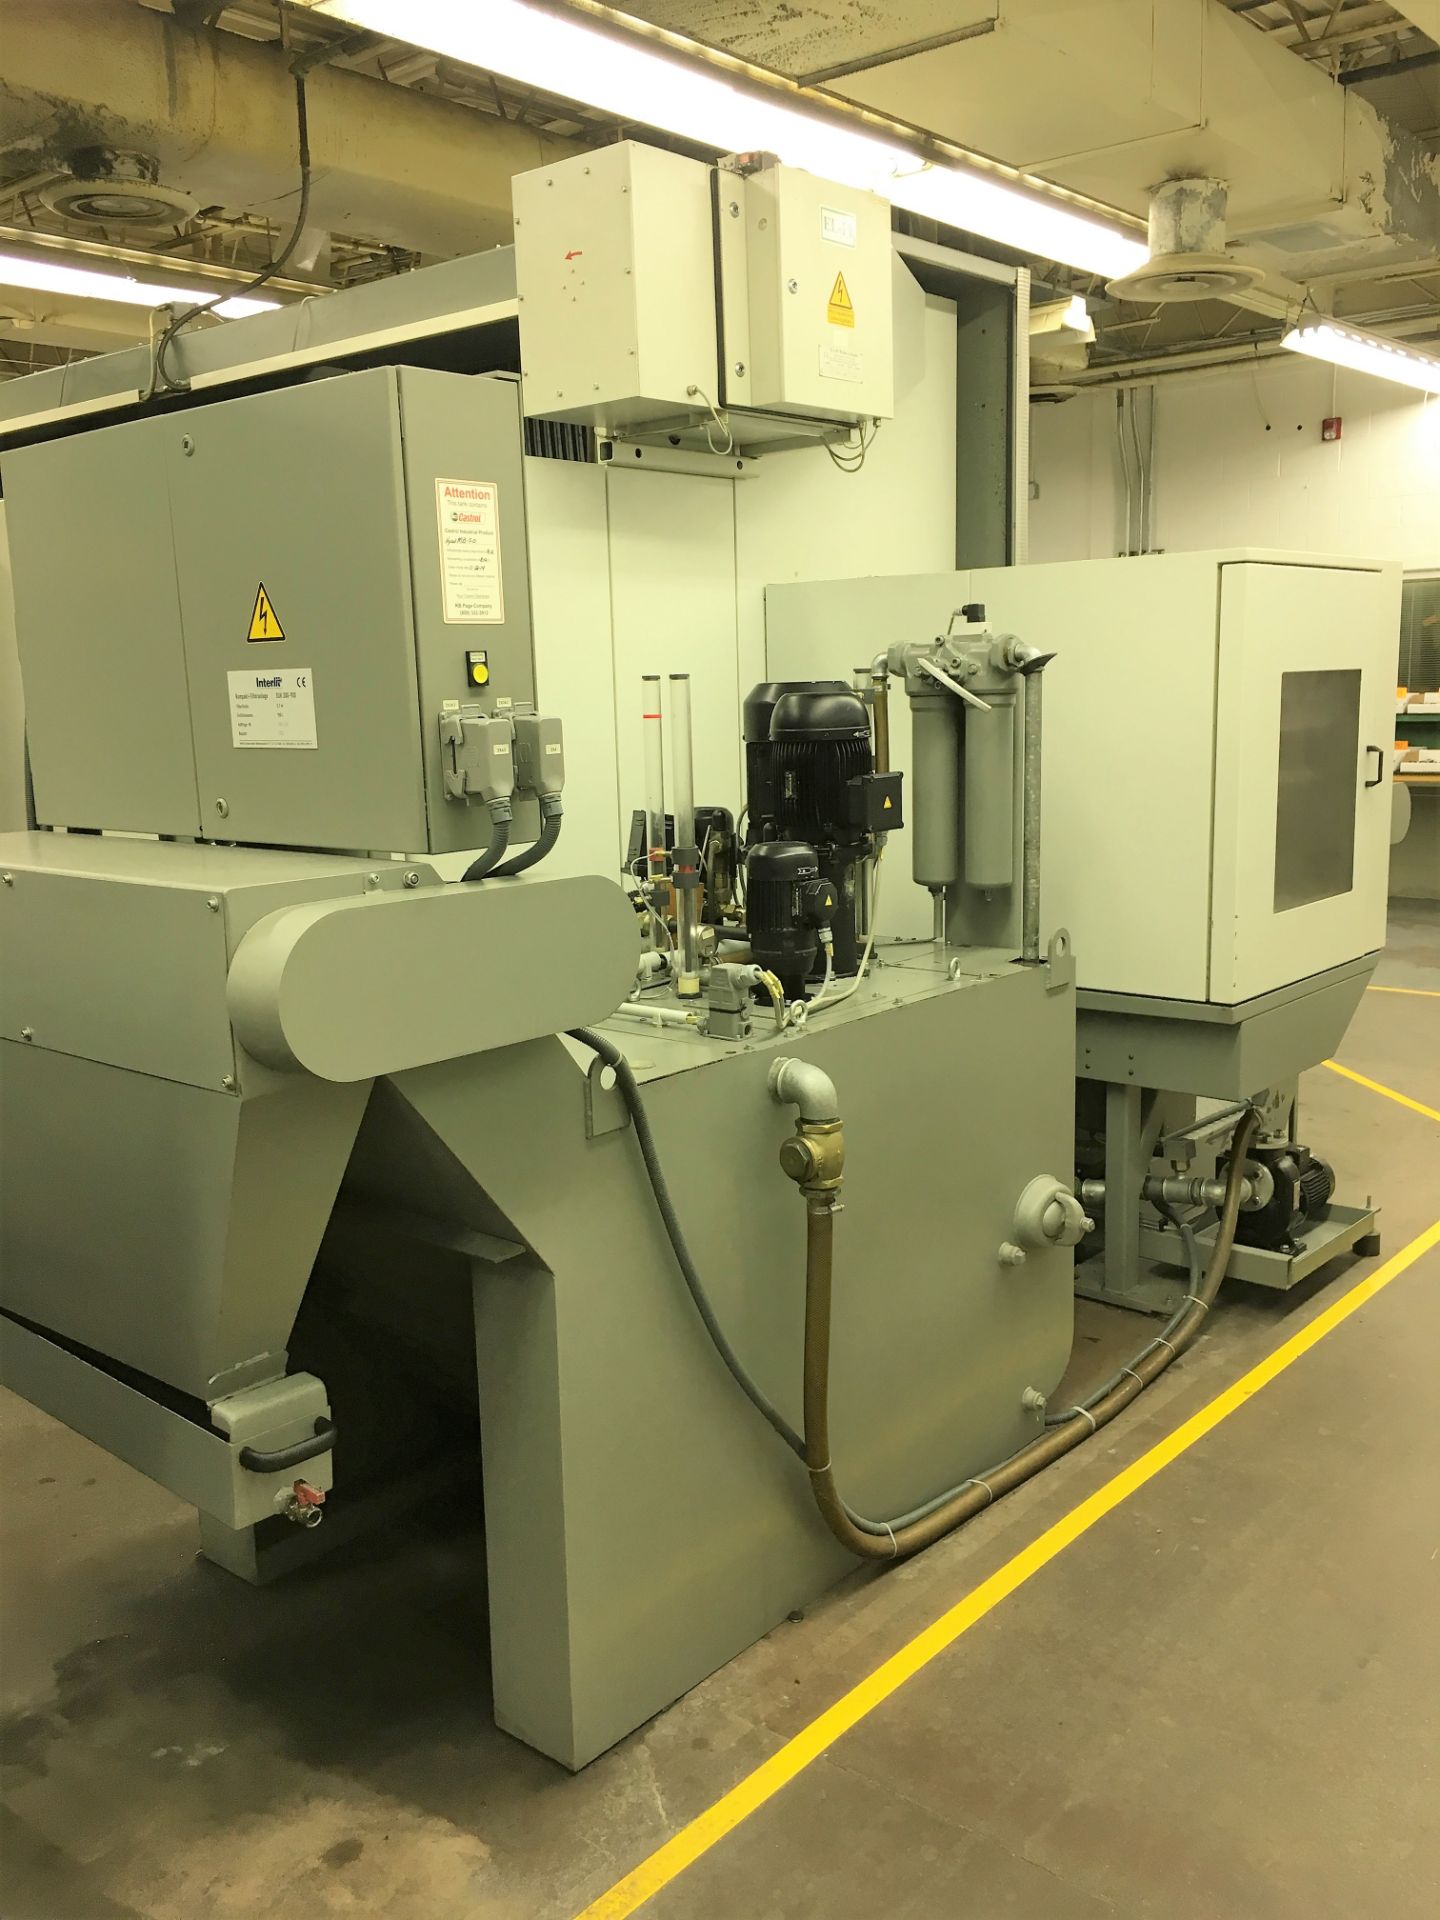 DECKEL-MAHO # DMU-70-VL ''FULL-5-AXIS'' CNC ''TWIN-CNC ROTARY TABLE'' VERTICAL MACHINING CENTER WITH - Image 6 of 6